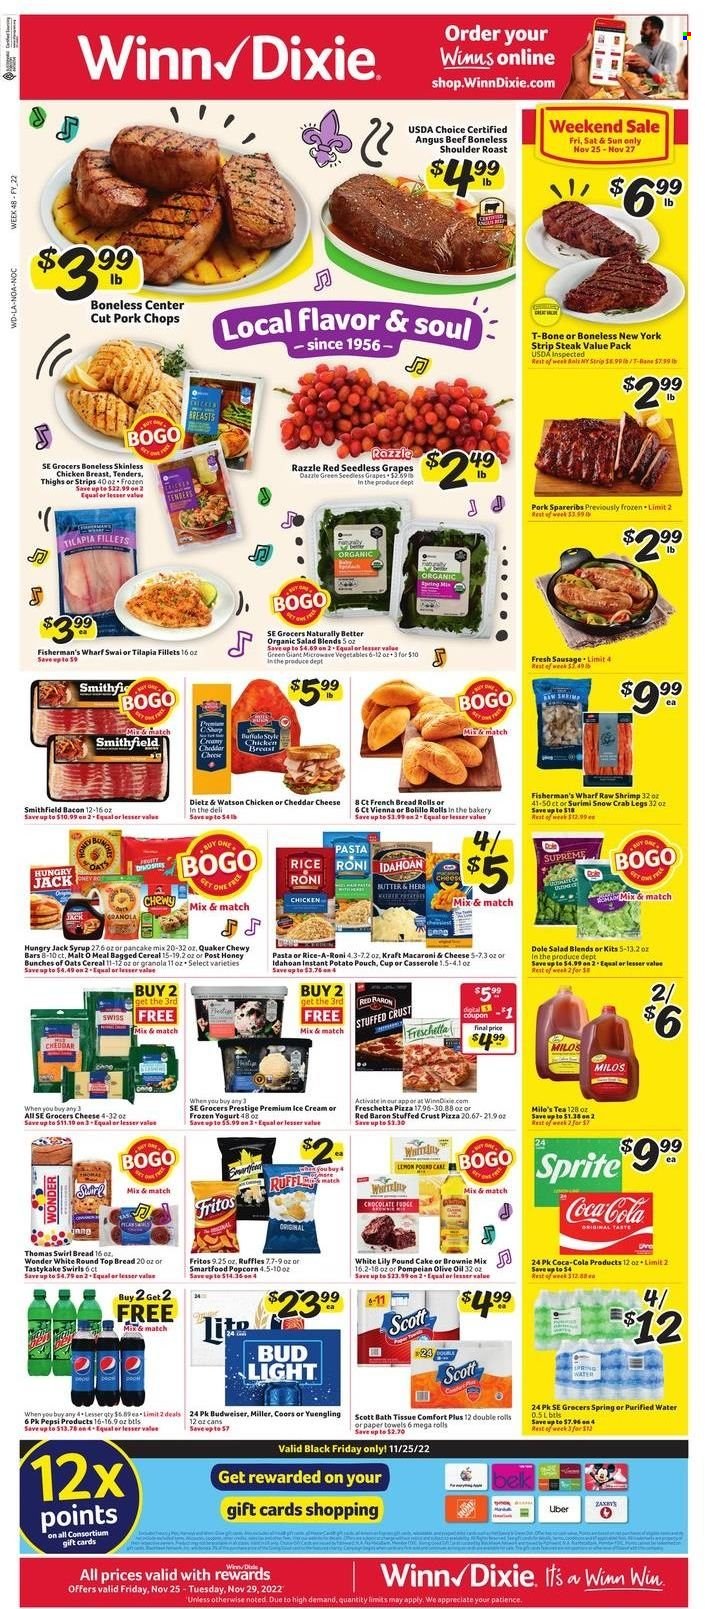 thumbnail - Winn Dixie Flyer - 11/25/2022 - 11/29/2022 - Sales products - bread, cake, french bread, pound cake, brownie mix, salad, Dole, grapes, seedless grapes, tilapia, crab legs, crab, shrimps, macaroni & cheese, pizza, pancakes, Quaker, Kraft®, bacon, Dietz & Watson, sausage, yoghurt, ice cream, strips, Red Baron, fudge, Fritos, Smartfood, popcorn, Ruffles, cereals, granola, rice, olive oil, oil, syrup, Coca-Cola, Sprite, Pepsi, Milo's, spring water, purified water, tea, beer, Bud Light, Miller, beef meat, t-bone steak, steak, striploin steak, pork chops, pork meat, pork spare ribs, bath tissue, Scott, kitchen towels, paper towels, casserole, cup, Budweiser, Coors, Yuengling. Page 1.